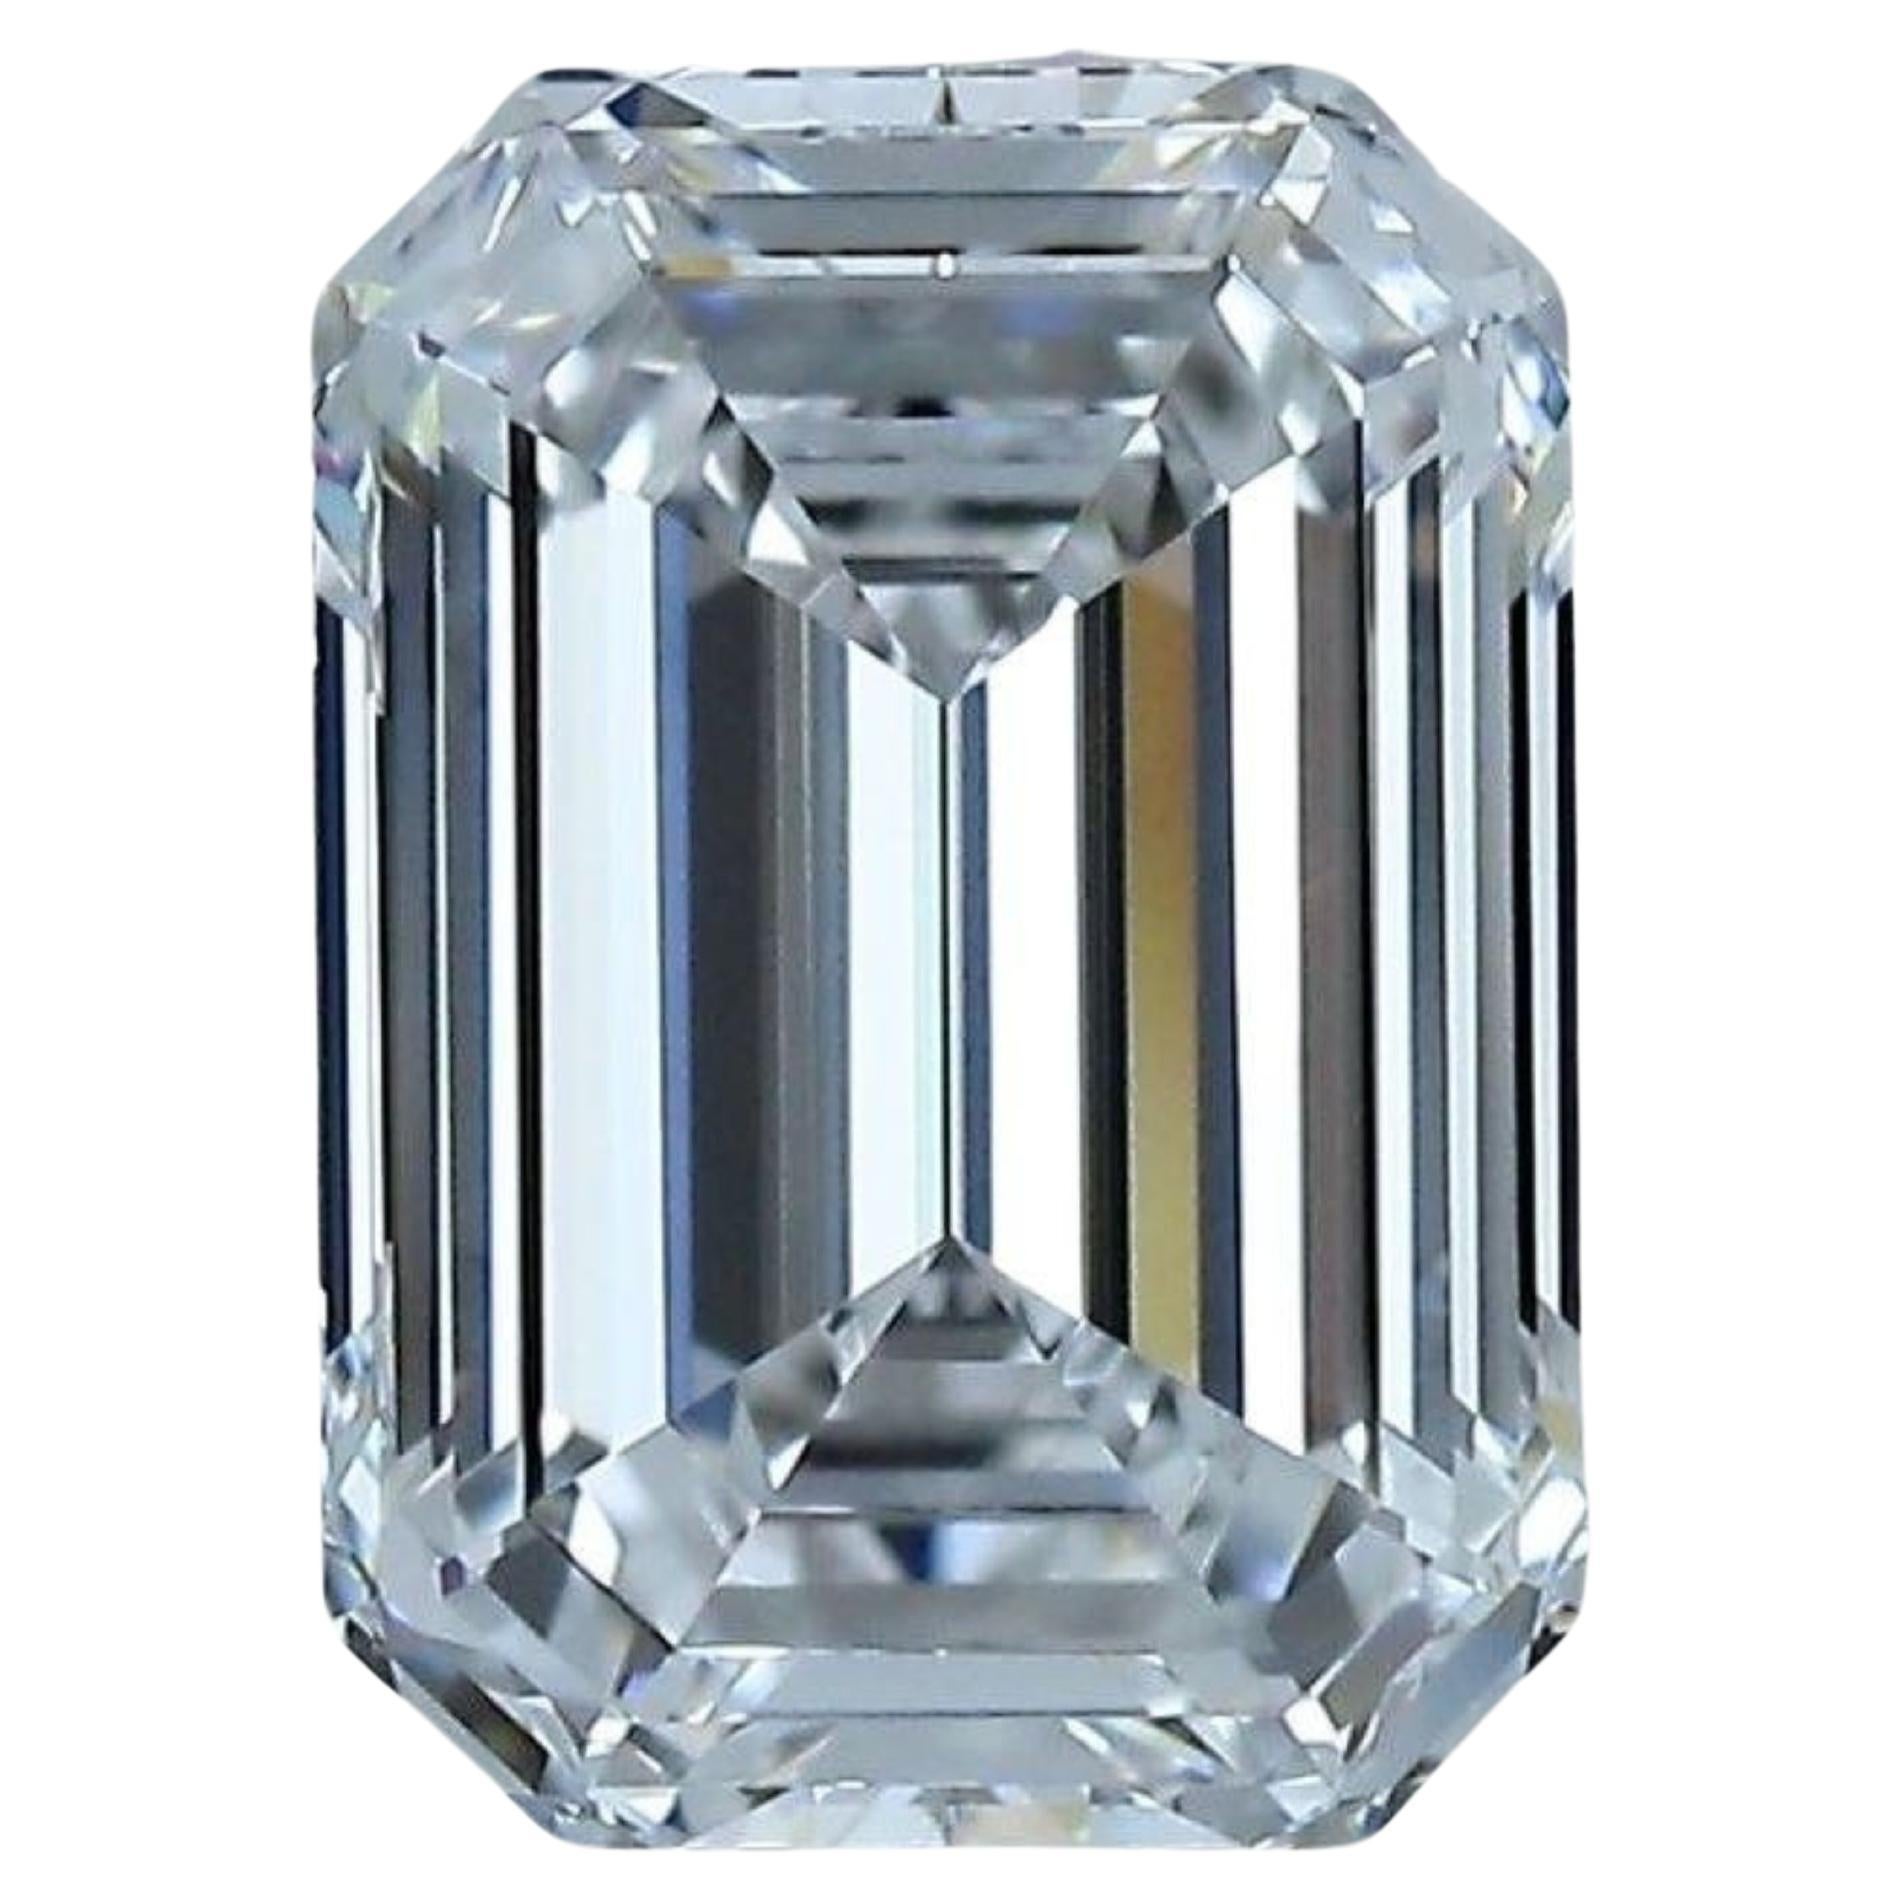 1pc. Shimmering 2.44 Carat Emerald Cut Natural Diamond For Sale